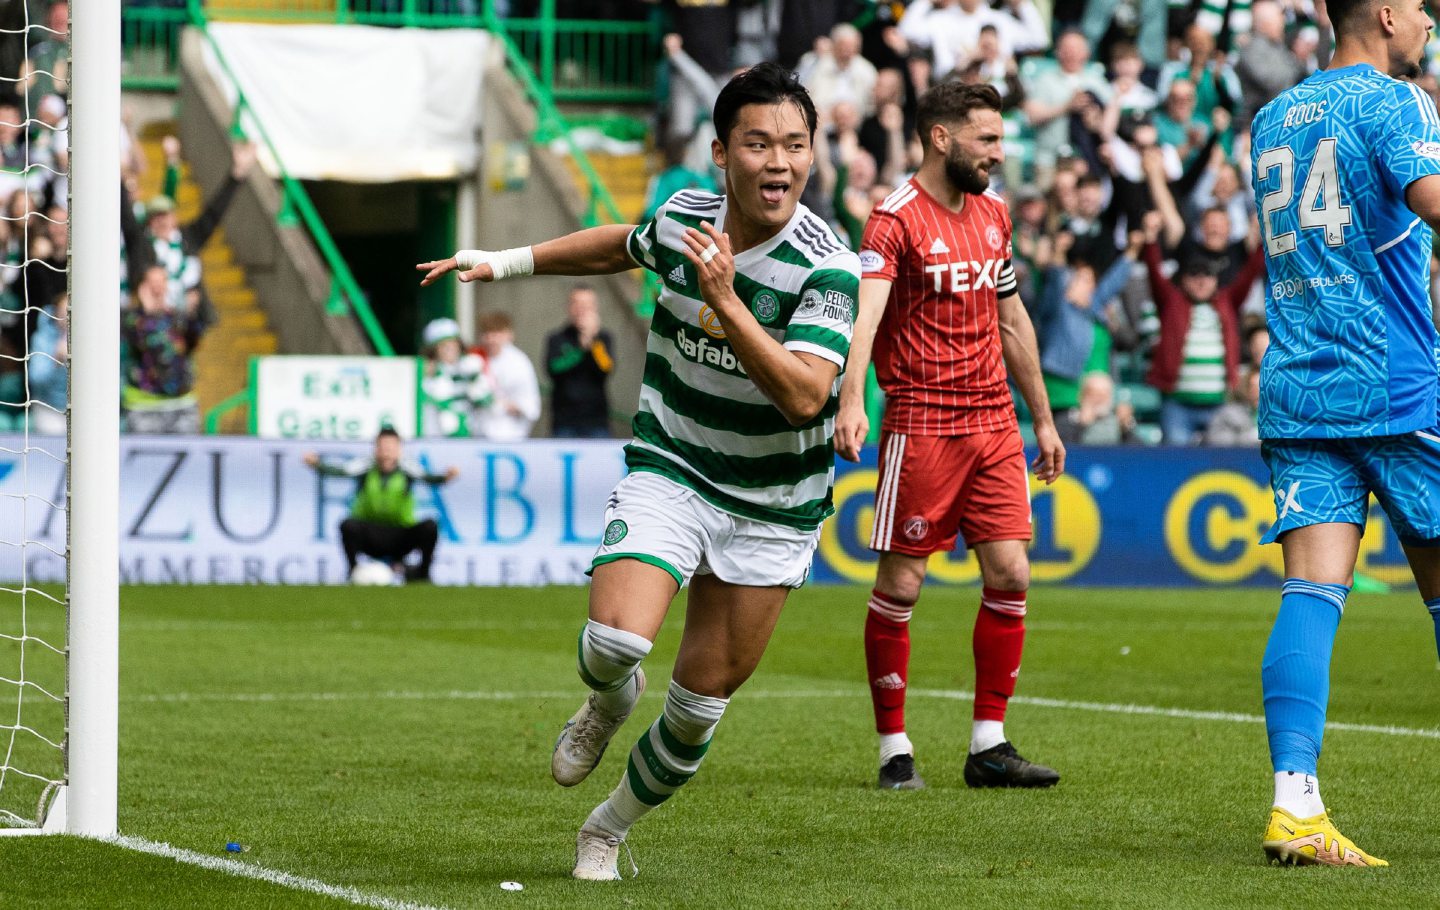  Celtic's Oh Hyeon-gyu celebrates after scoring to make it 5-0 against Aberdeen.